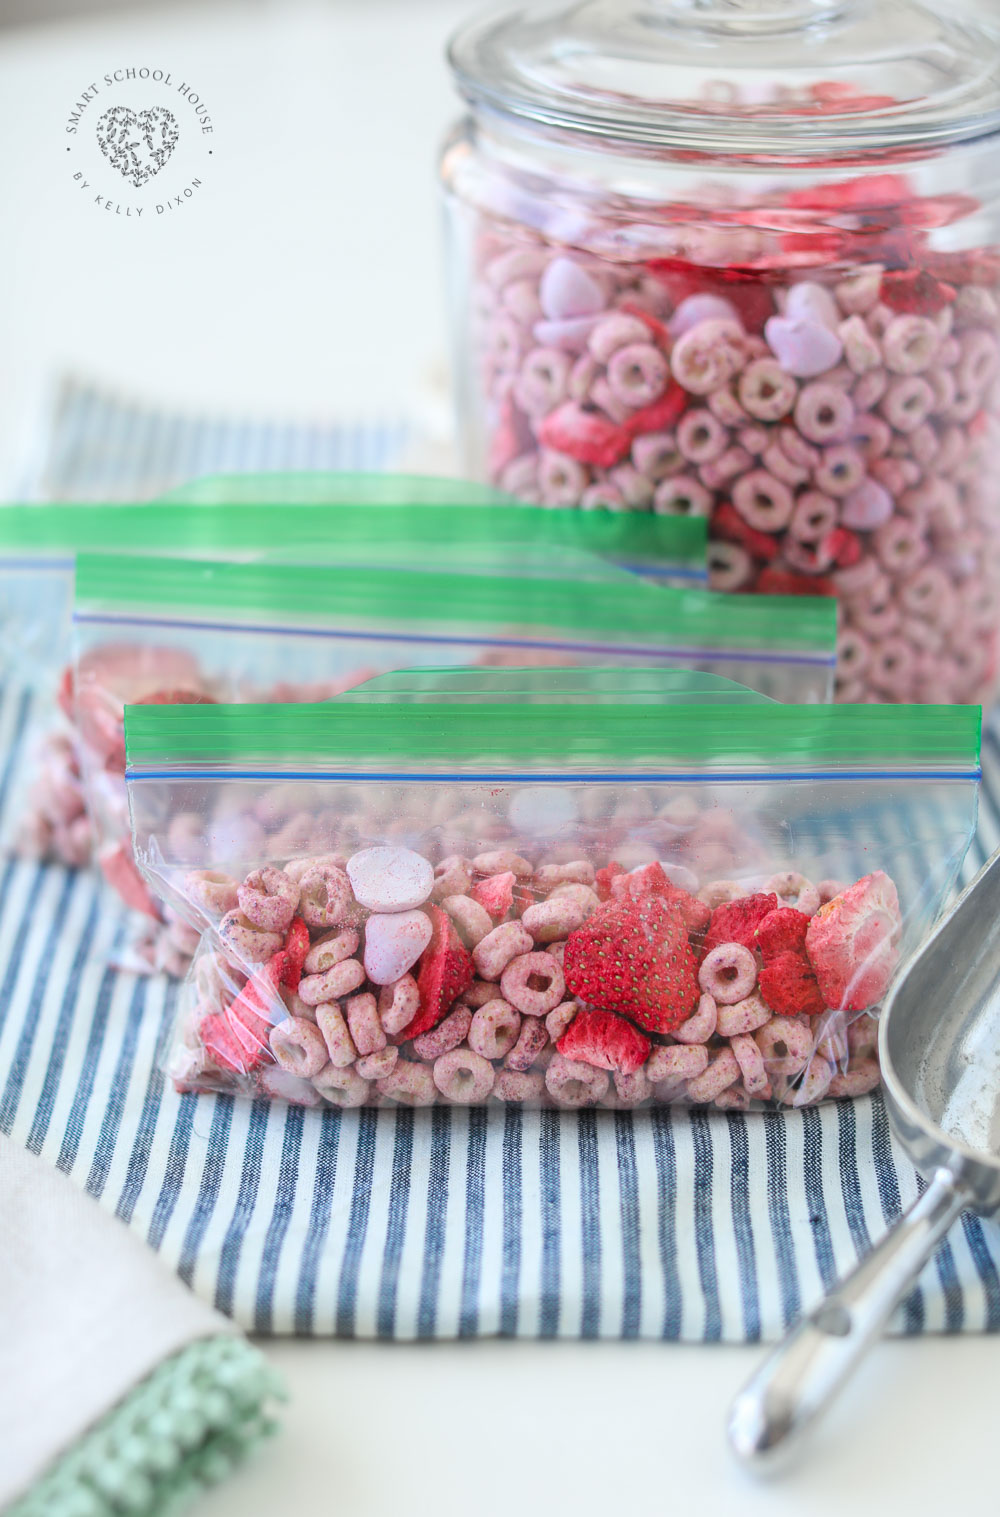 Baby Trail Mix isn't just for babies! The strawberries immediately soften when eating. This is recommended for babies who are ready to eat solids, as well as toddlers, big kids…. pretty much anyone because it’s DELICIOUS!